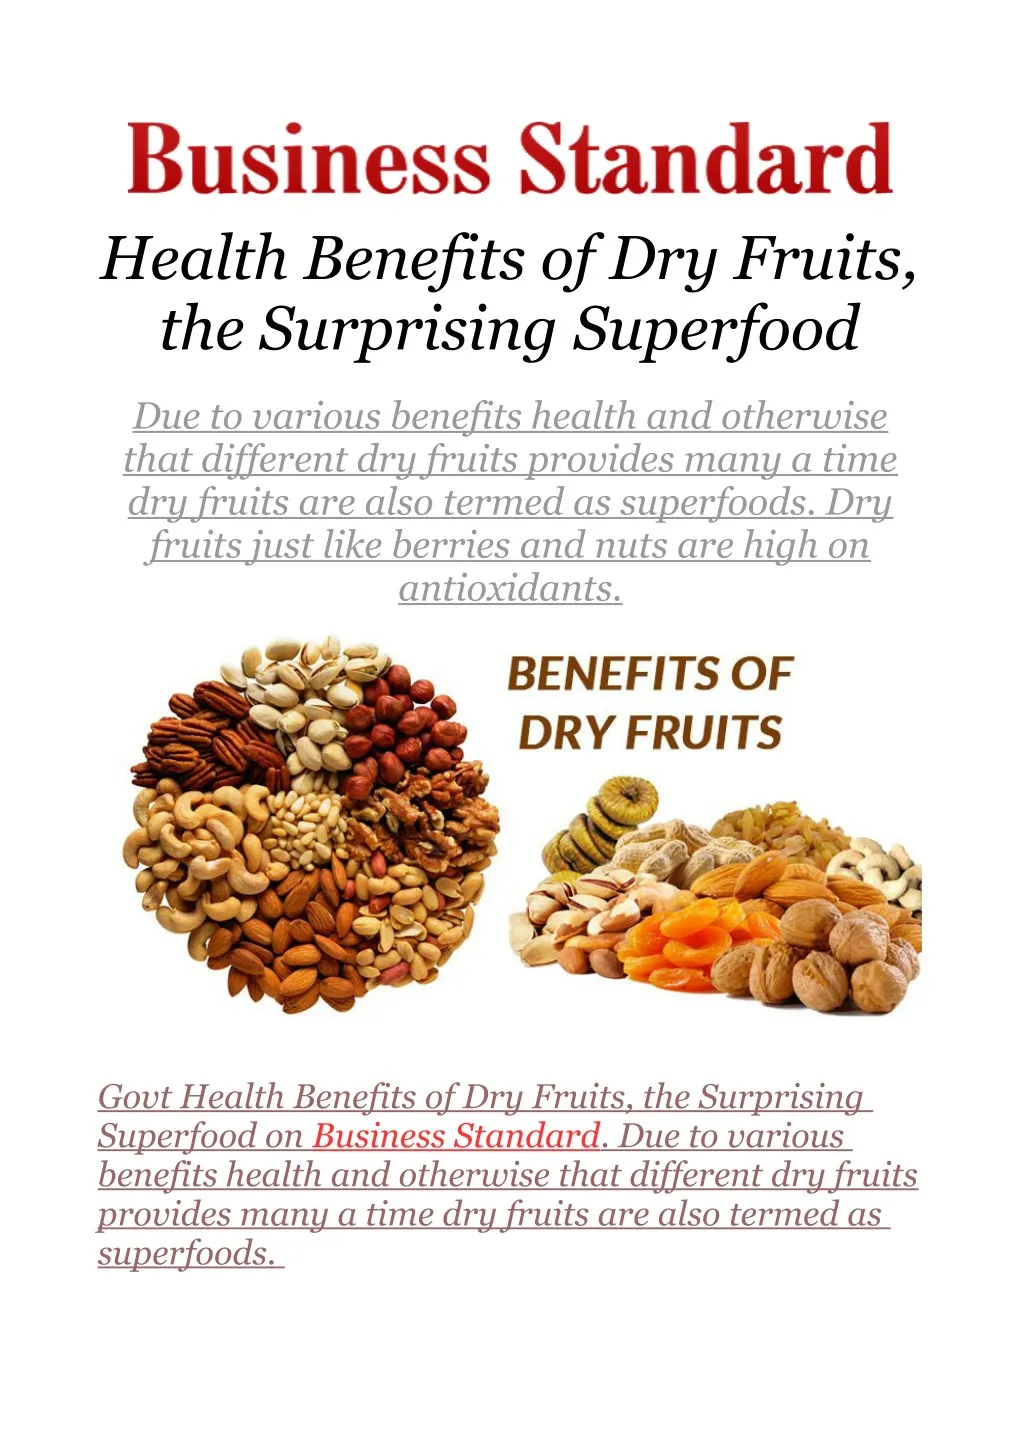 health benefits of dry fruits the surprising